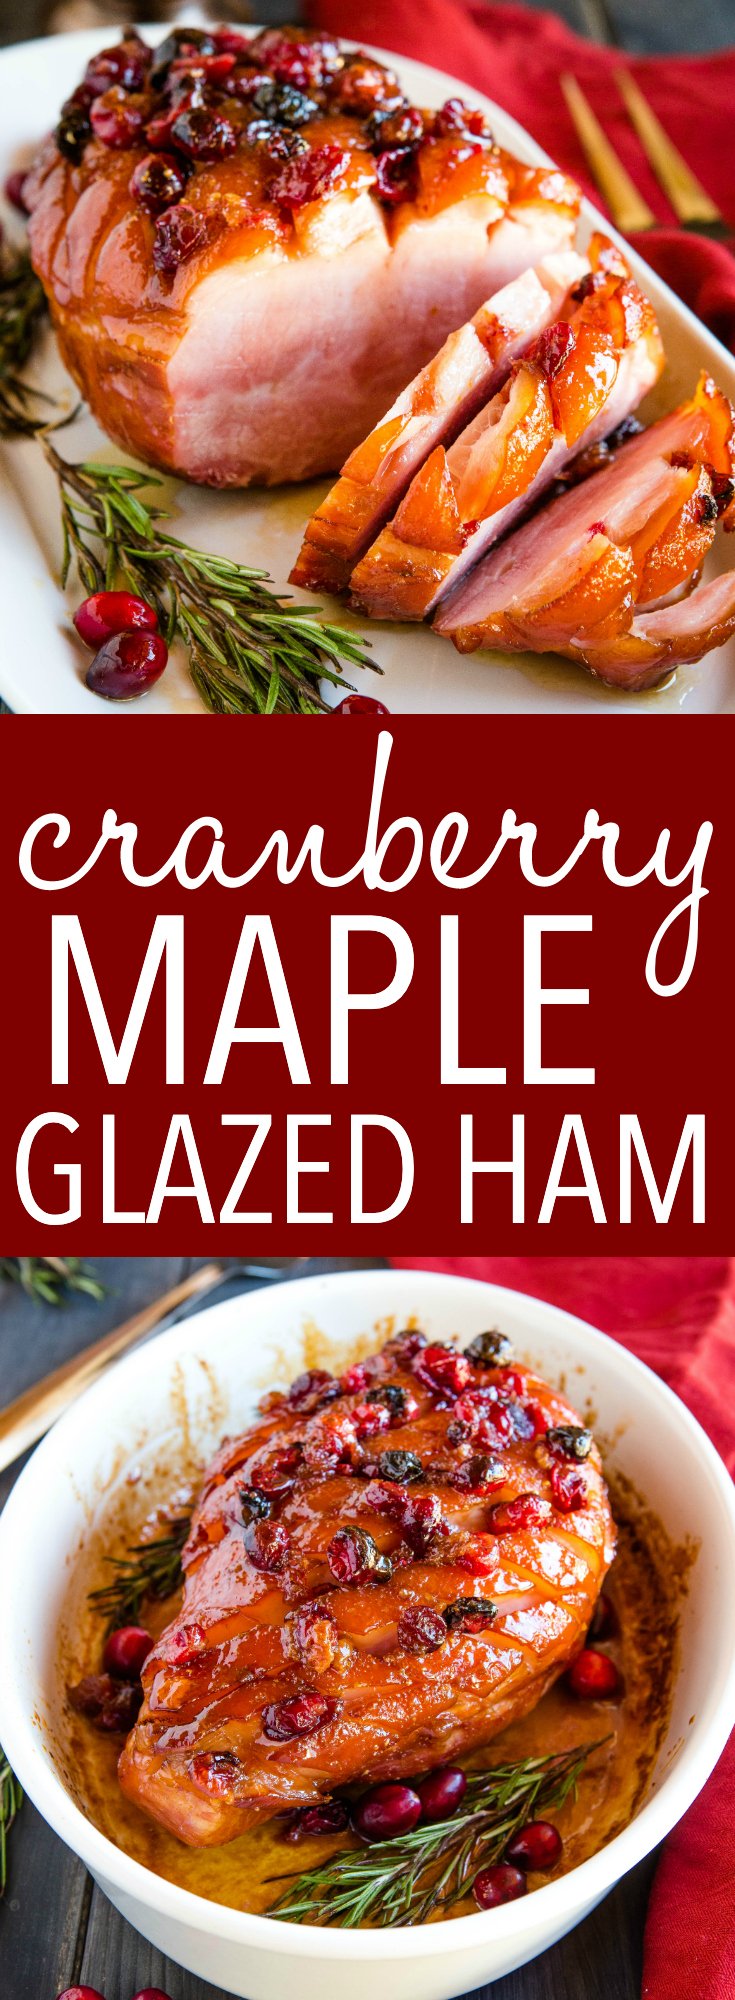 This Easy Cranberry Maple Glazed Ham is the perfect simple main dish for the holidays, and it's perfect for a crowd! An easy 3-ingredient maple glaze and fresh cranberries makes this Christmas Ham so delicious! Recipe from thebusybaker.ca! #ham #christmas #holidayham #holidays #cranberries #maple #mapleglazedham #easyrecipe #simple #homemade #recipe #roasting #christmasdinner #dinner #potluck via @busybakerblog